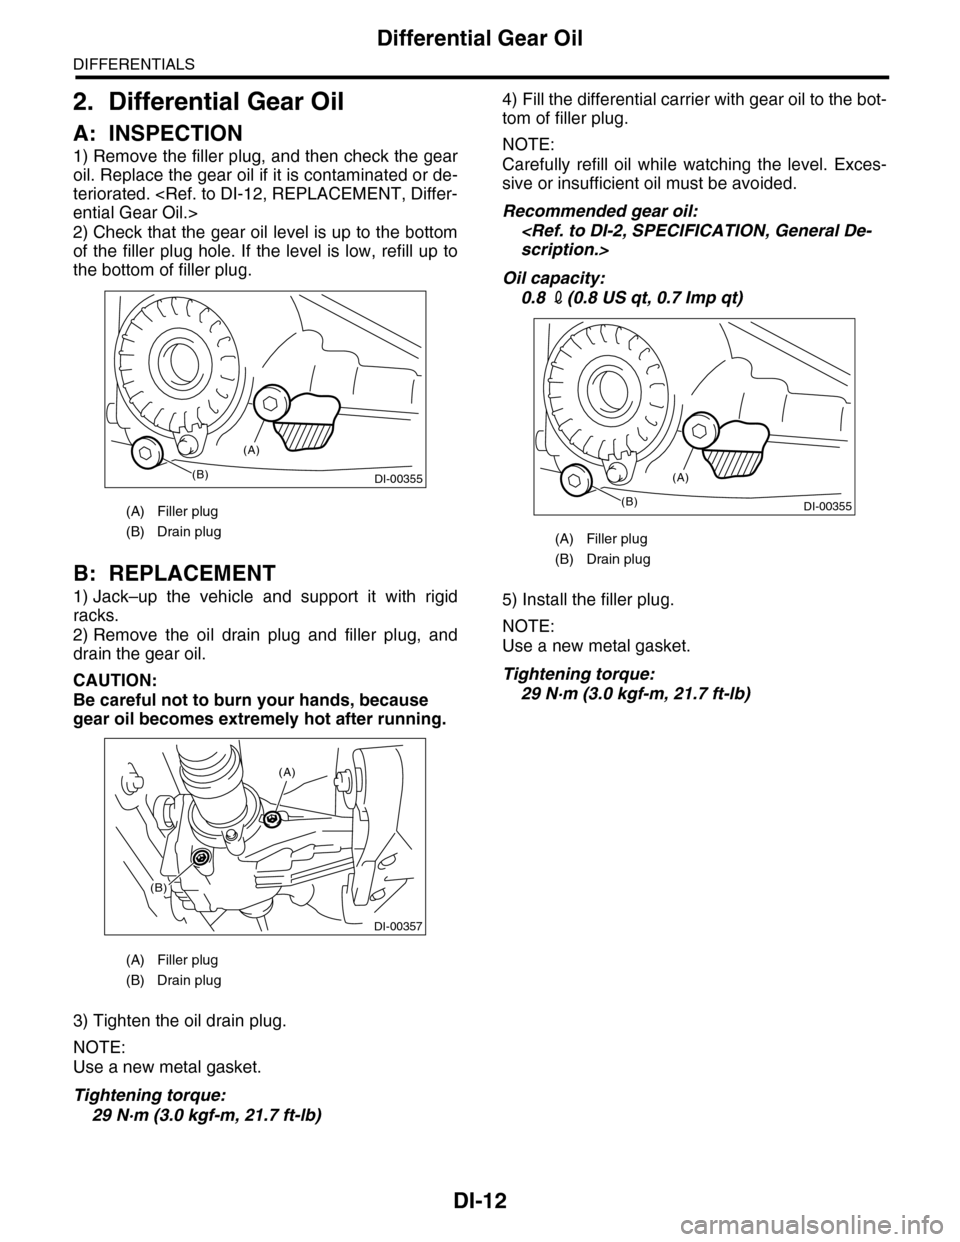 SUBARU TRIBECA 2009 1.G Service Workshop Manual DI-12
Differential Gear Oil
DIFFERENTIALS
2. Differential Gear Oil
A: INSPECTION
1) Remove the filler plug, and then check the gear
oil. Replace the gear oil if it is contaminated or de-
teriorated. <